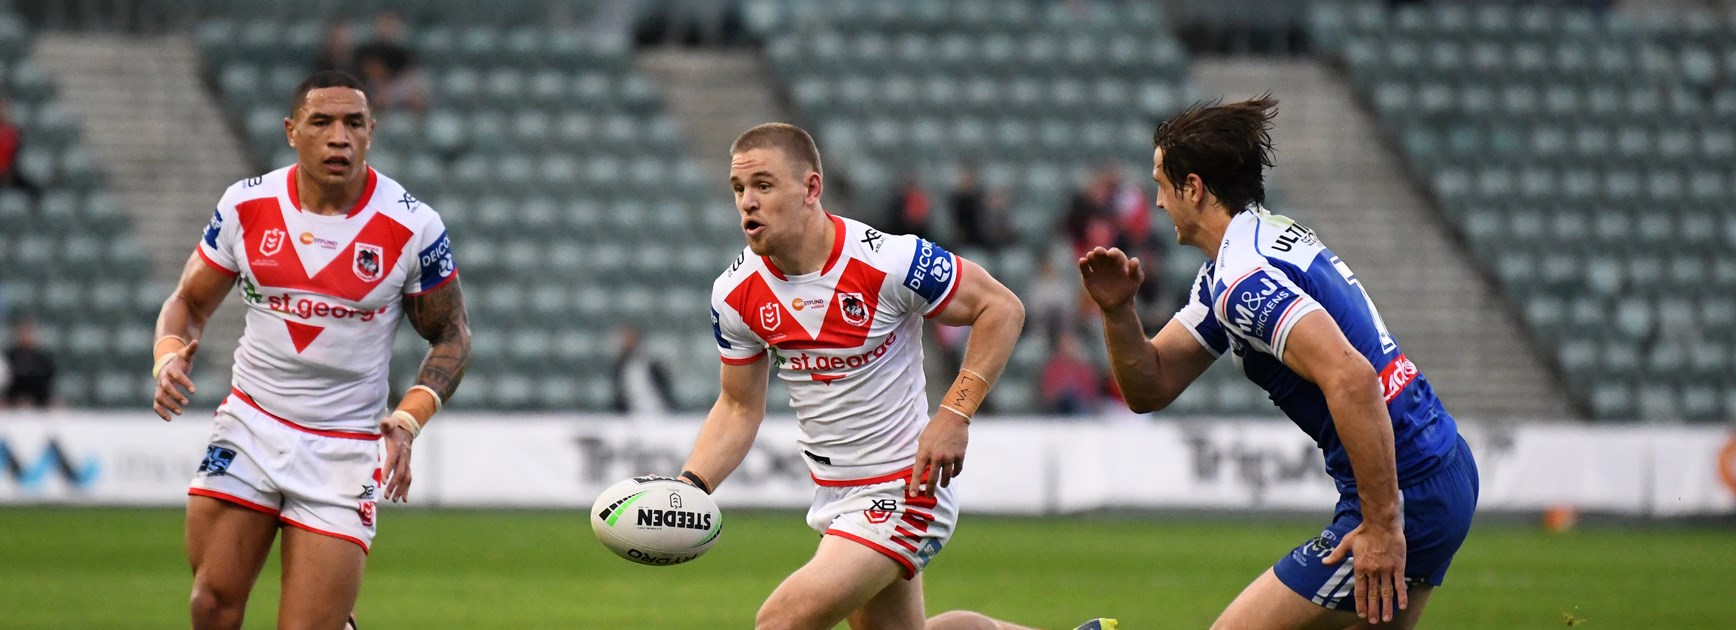 'This could be where my career starts or finishes': Dufty's six-week revival